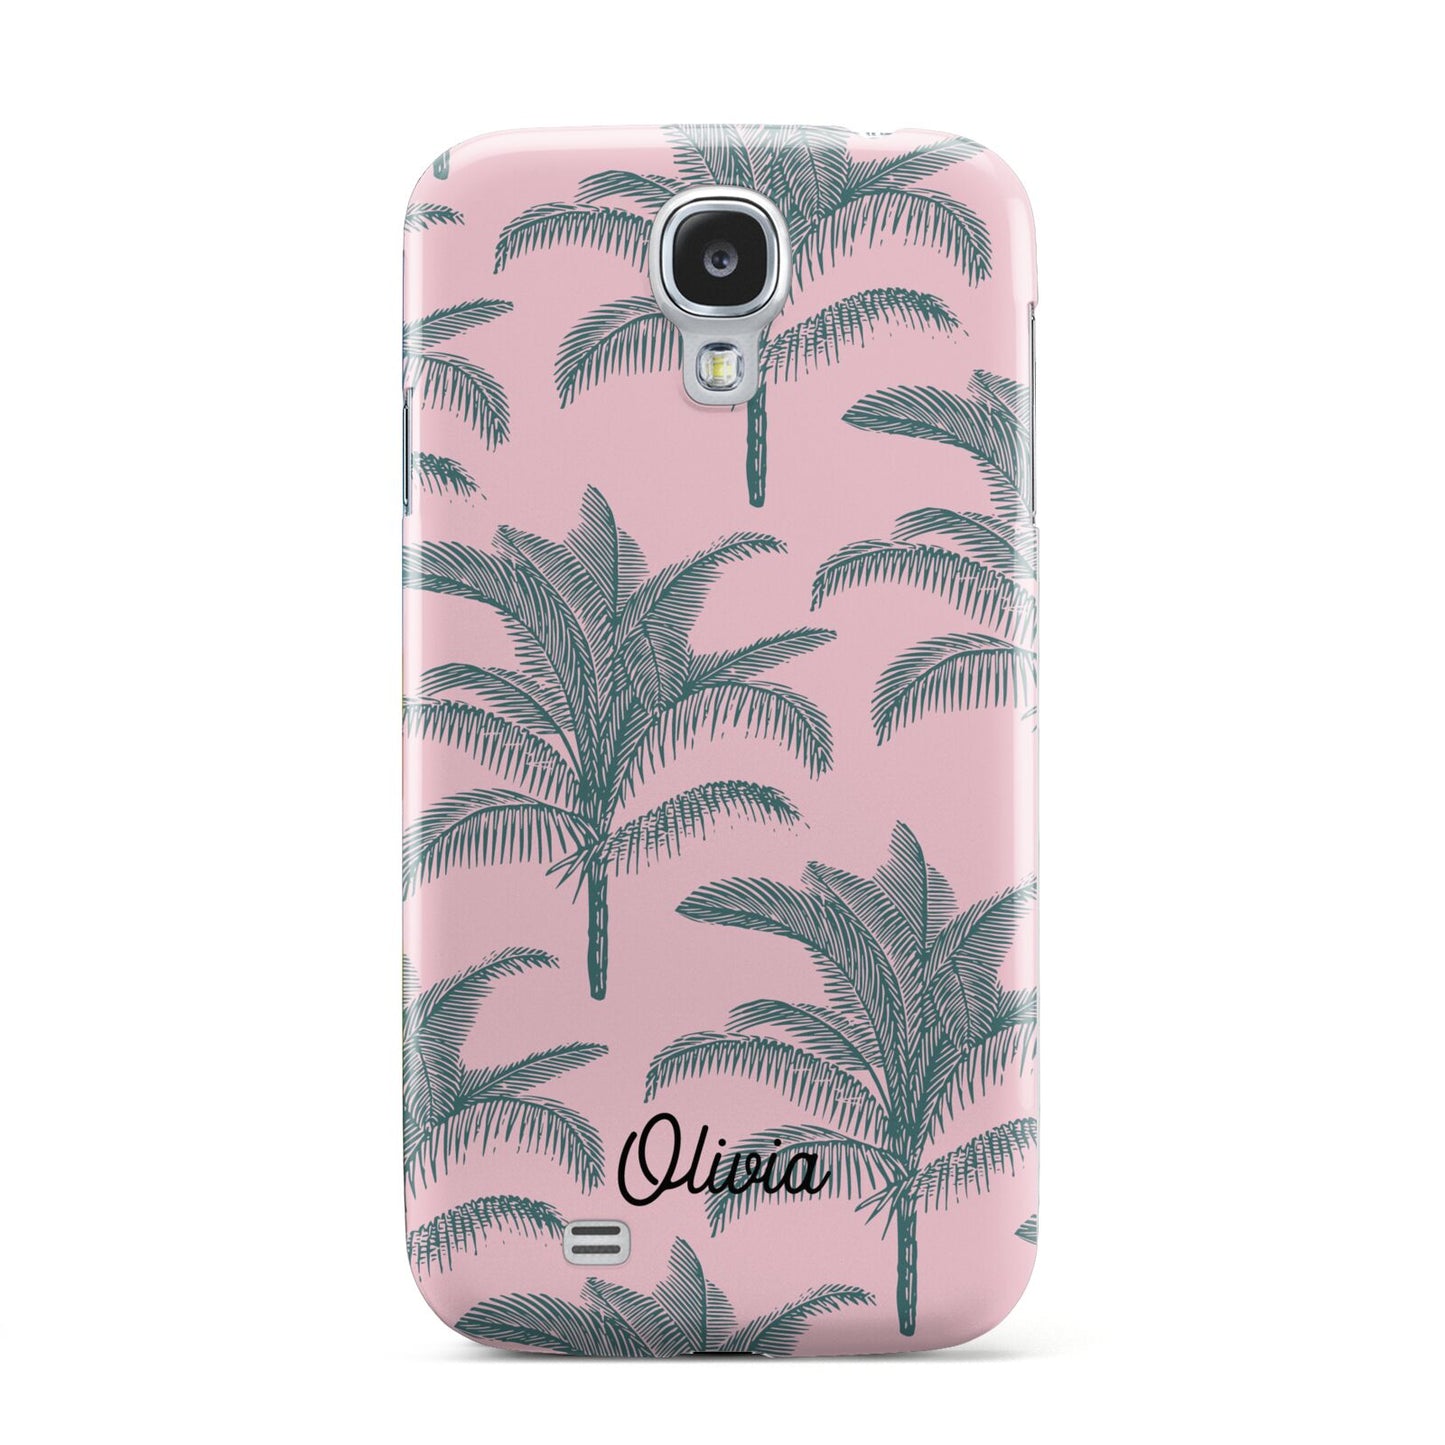 Personalised Palm Samsung Galaxy S4 Case